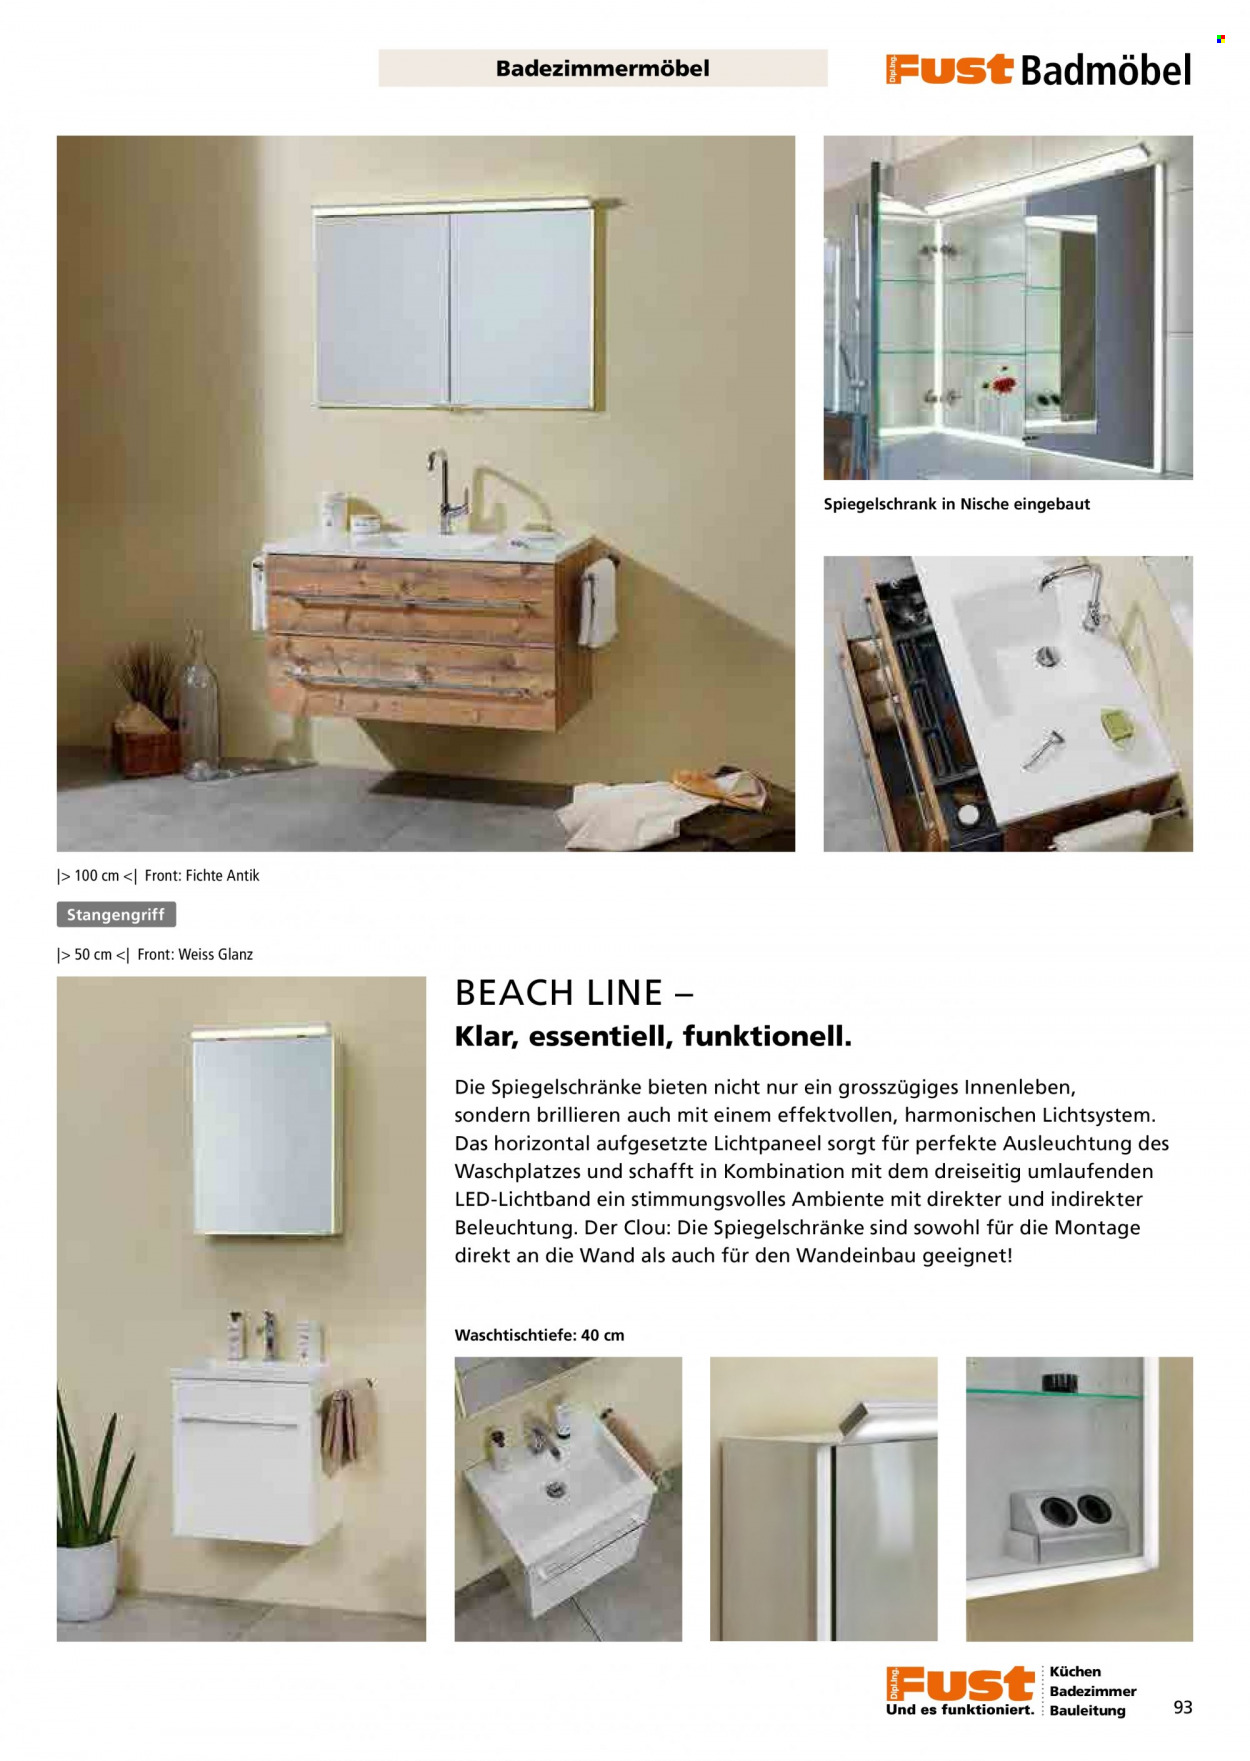 Catalogue Fust. Page 93.